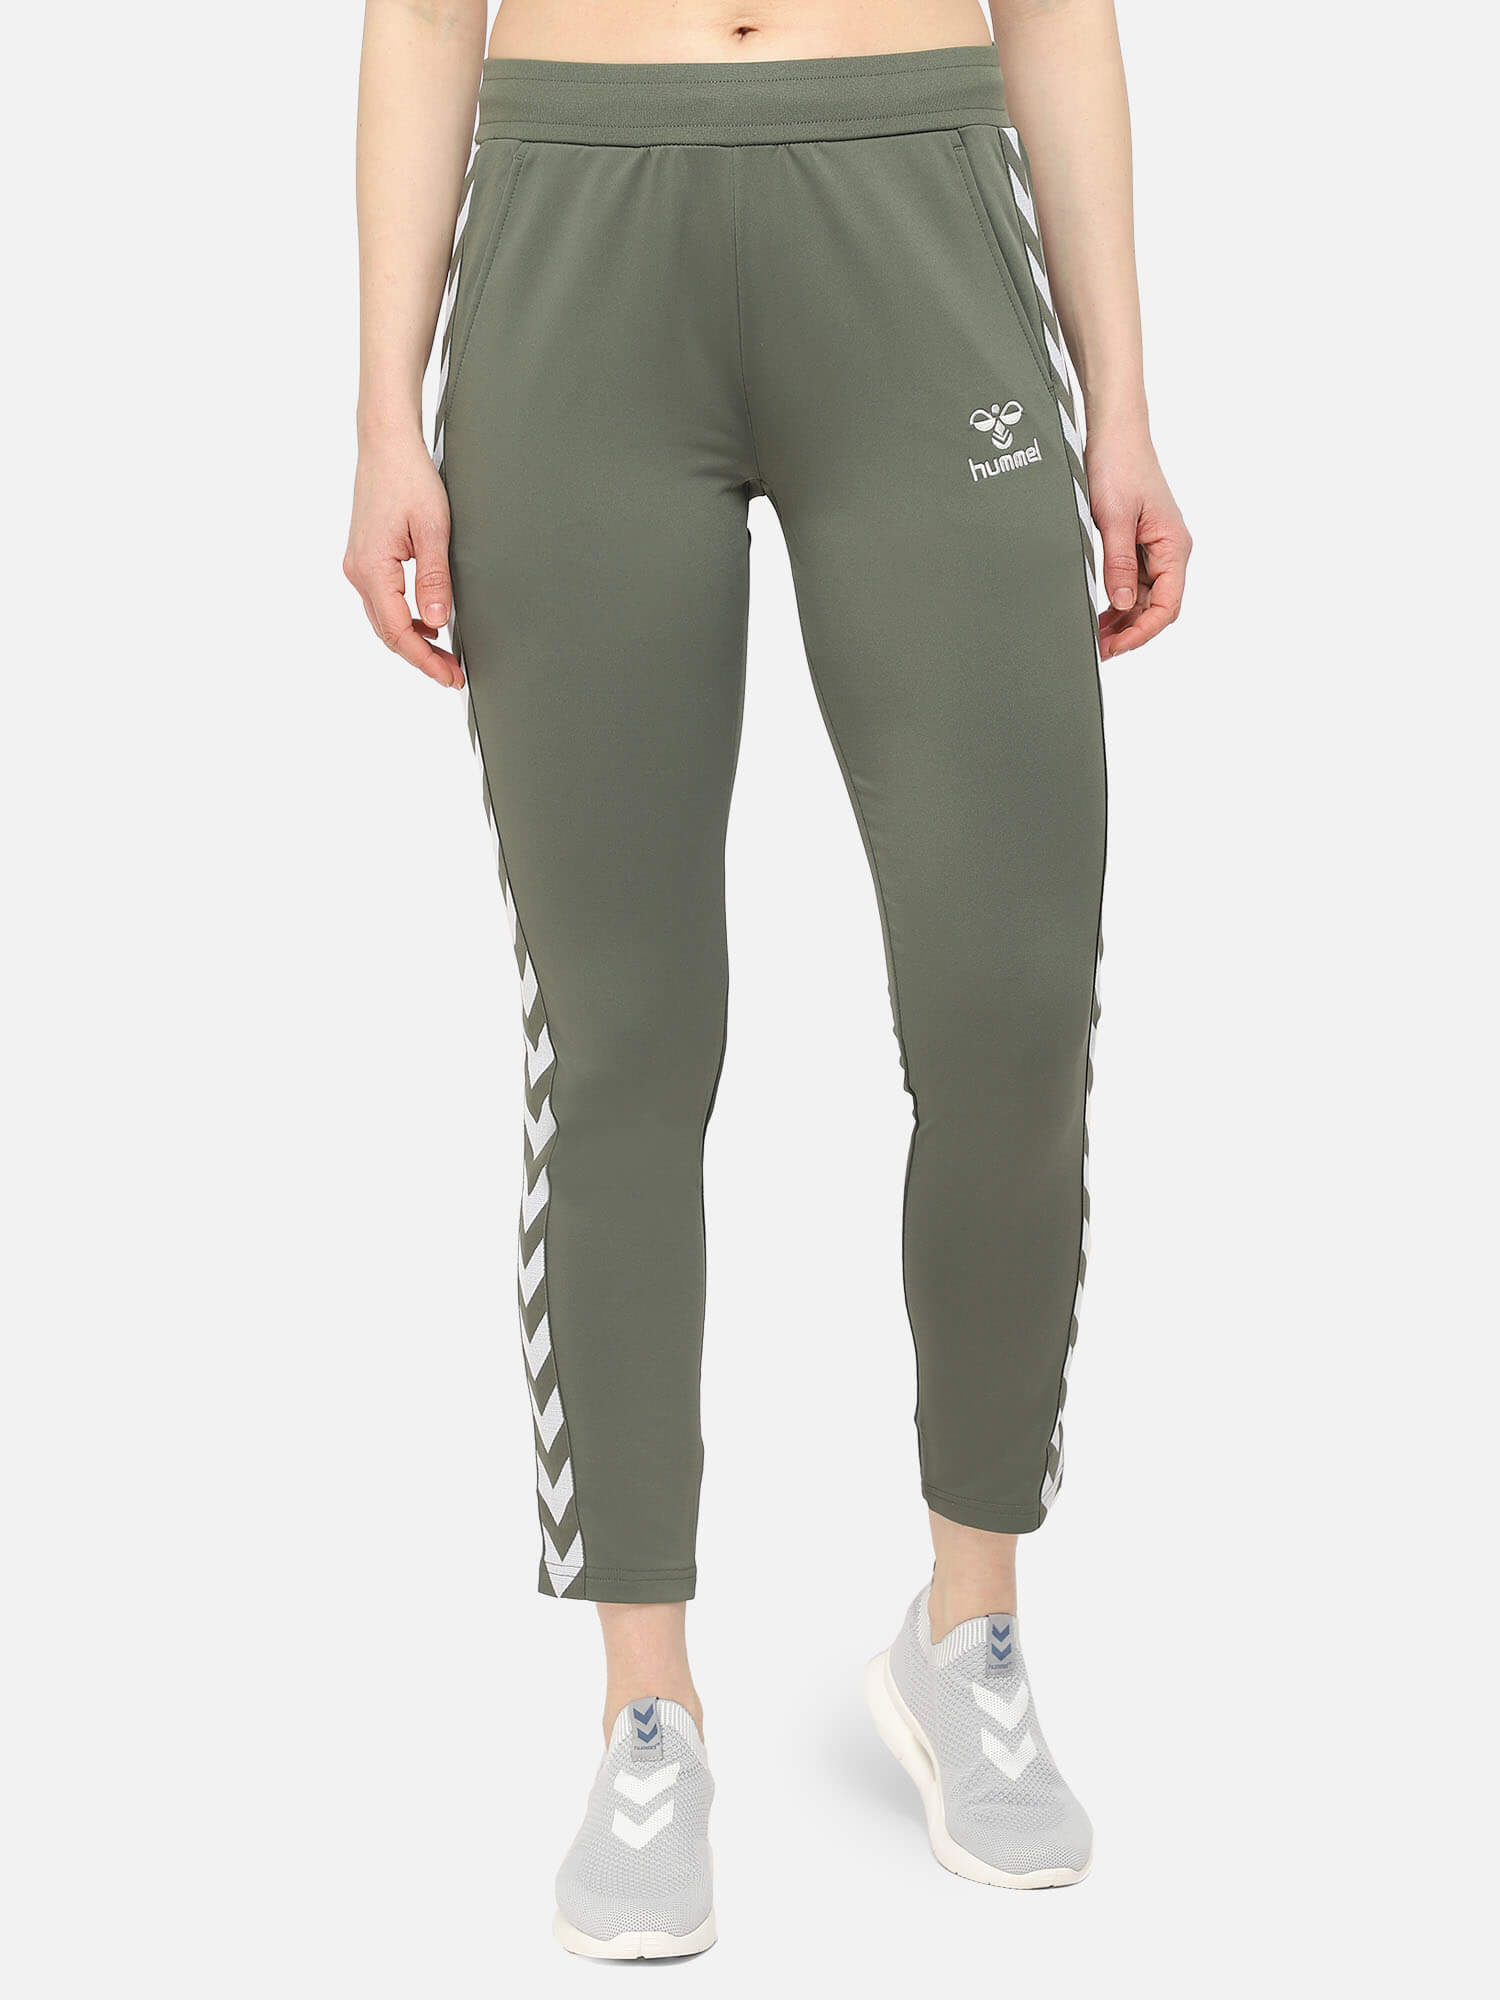 Nelly 2.0 Tapered Green Pants for Women